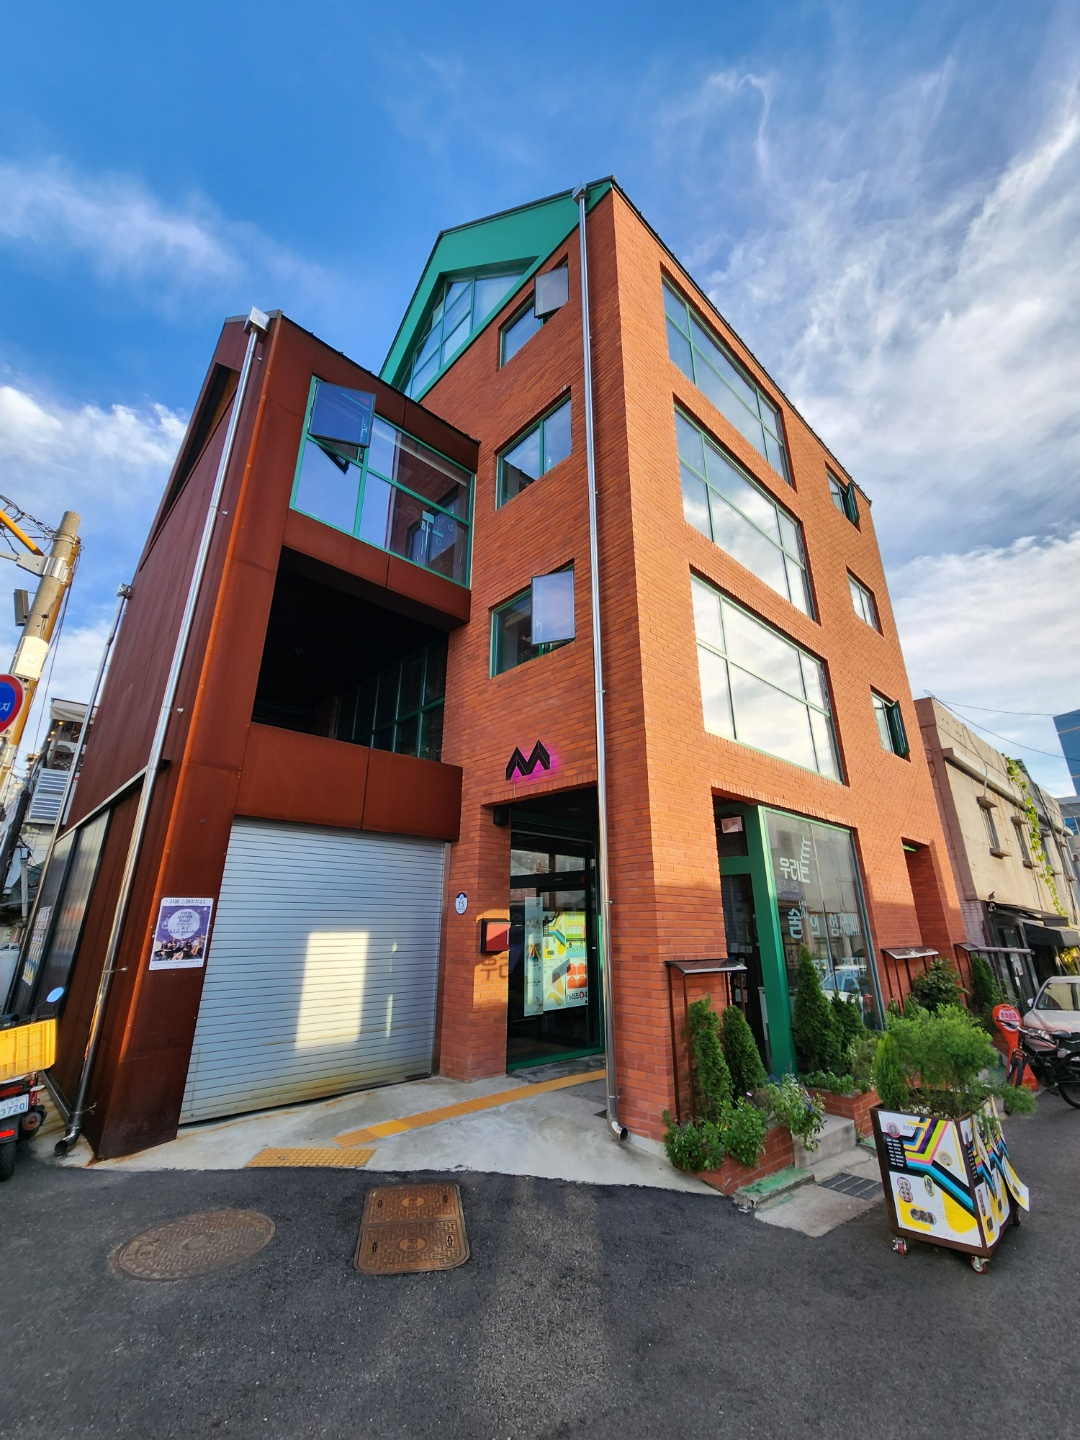 Seoul Art Space Mullae, a city-funded arts incubation center set up in 2010 by the Seoul Foundation for Arts and Culture (Choi Jae-hee / The Korea Herald)